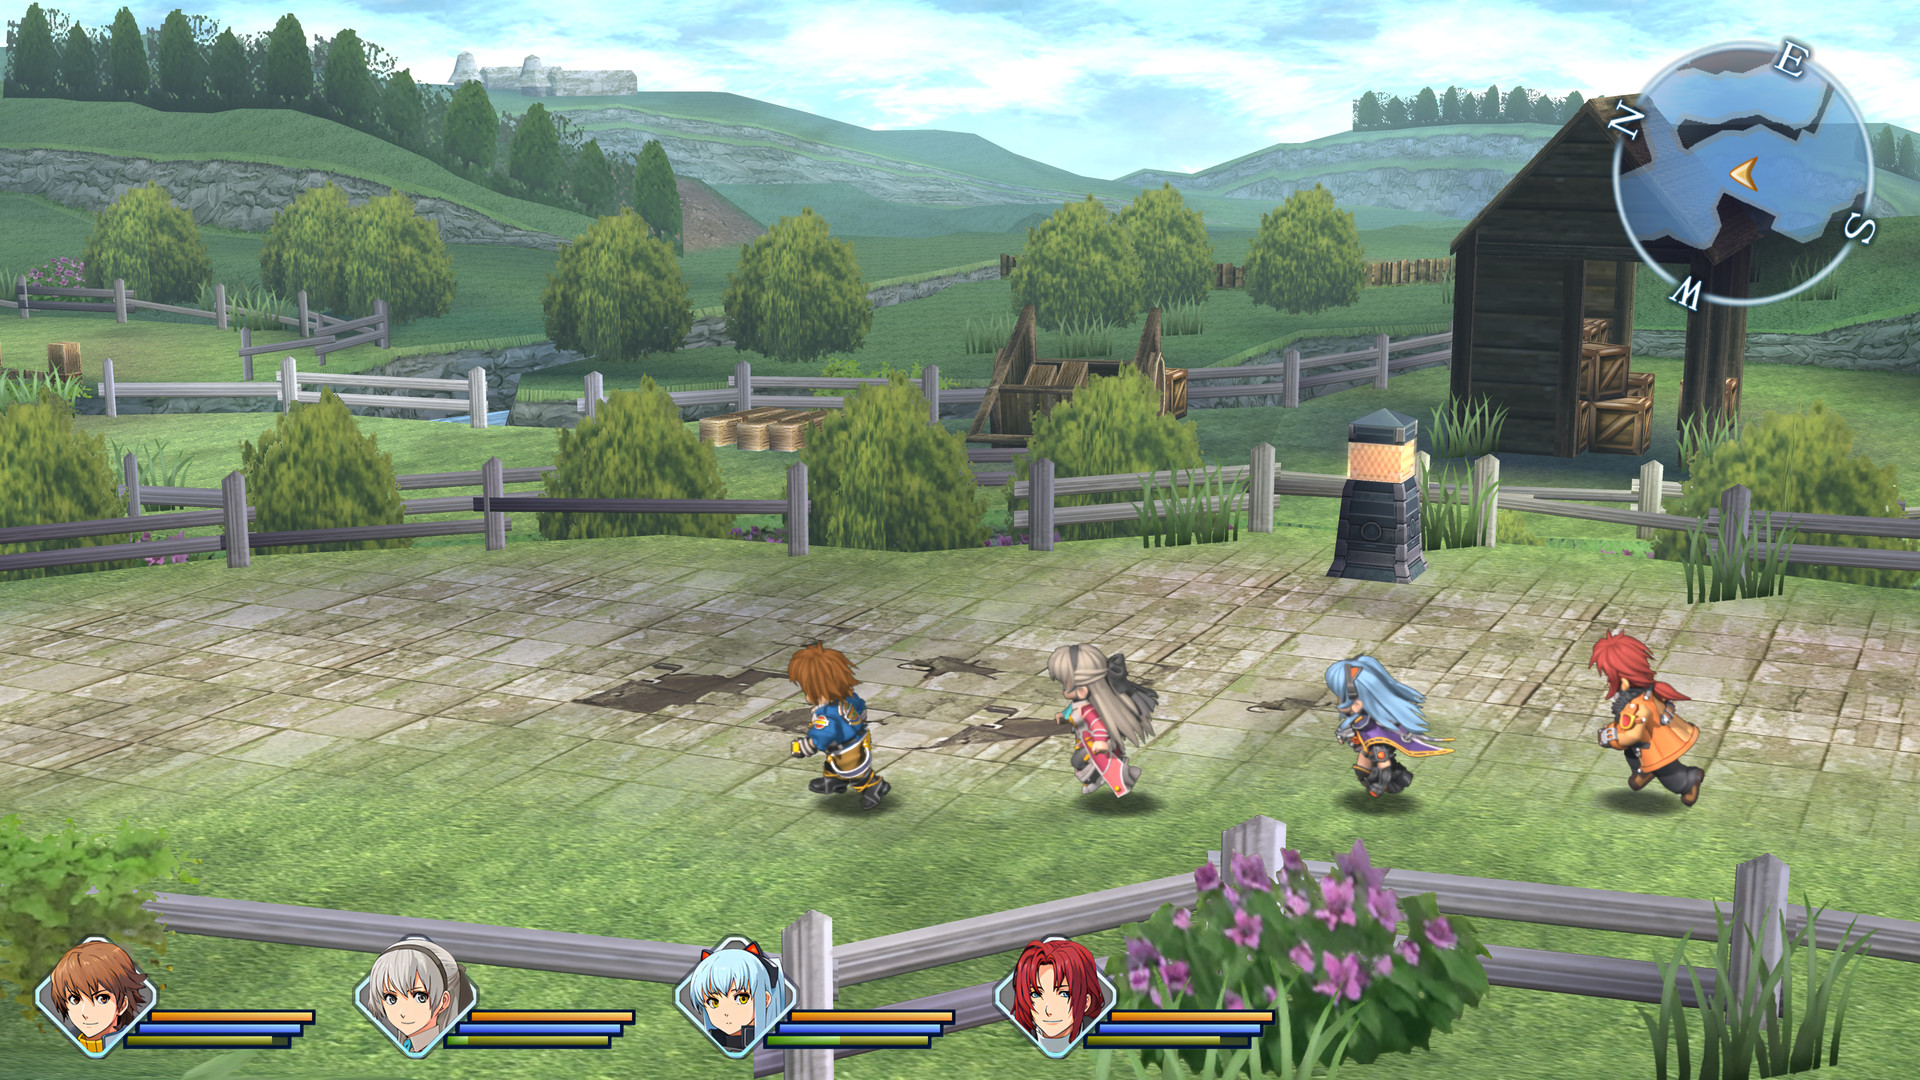 Best JRPGs - The player party runs across verdant meadowland in The Legend of Heroes: Trails from Zero.